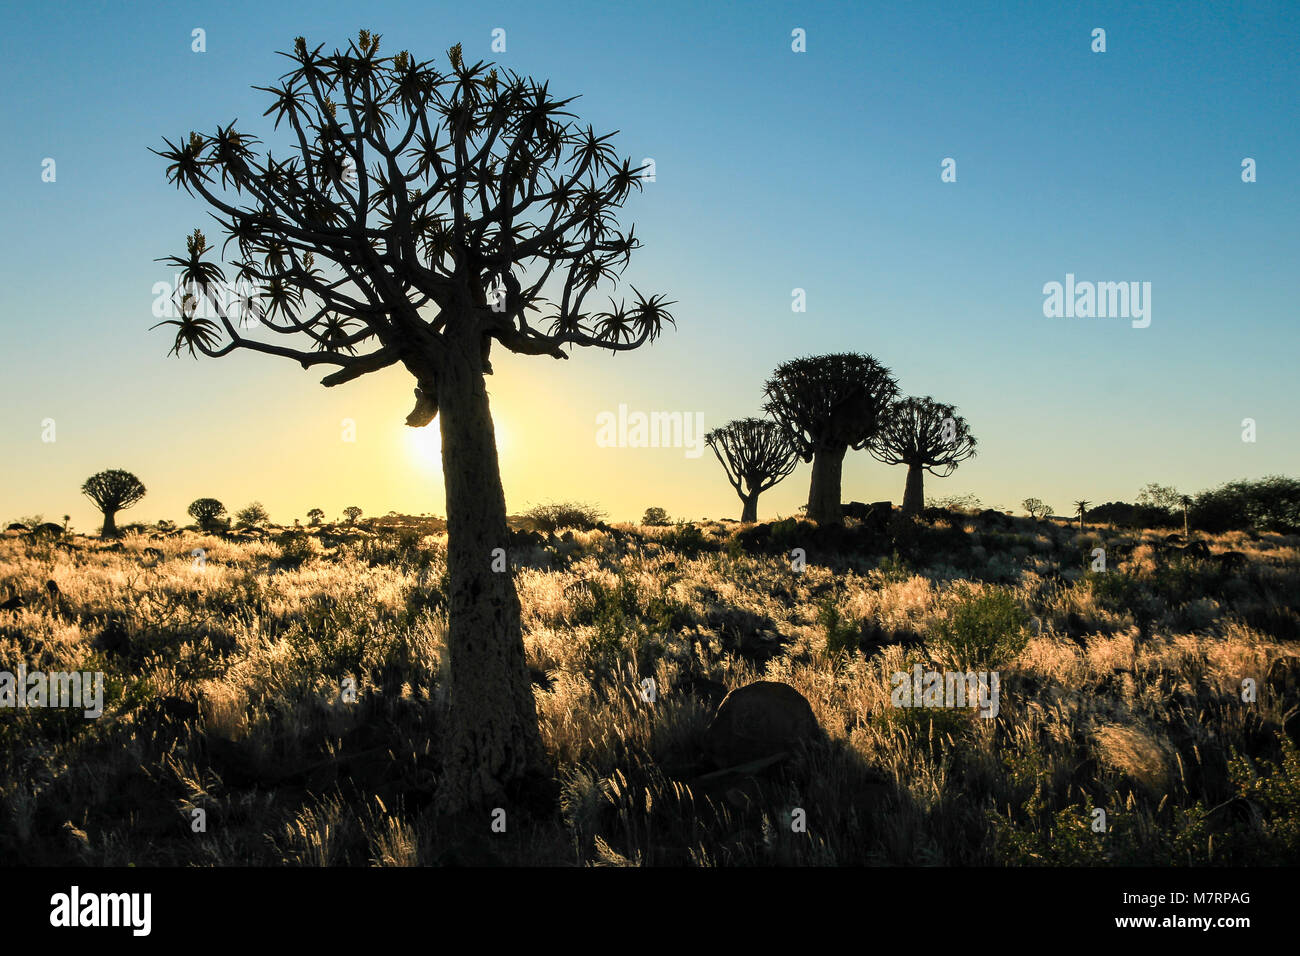 Beautiful african sunset with silhouetted quivertrees and illuminated grassland. Namibia near Keetmanshoop. Stock Photo